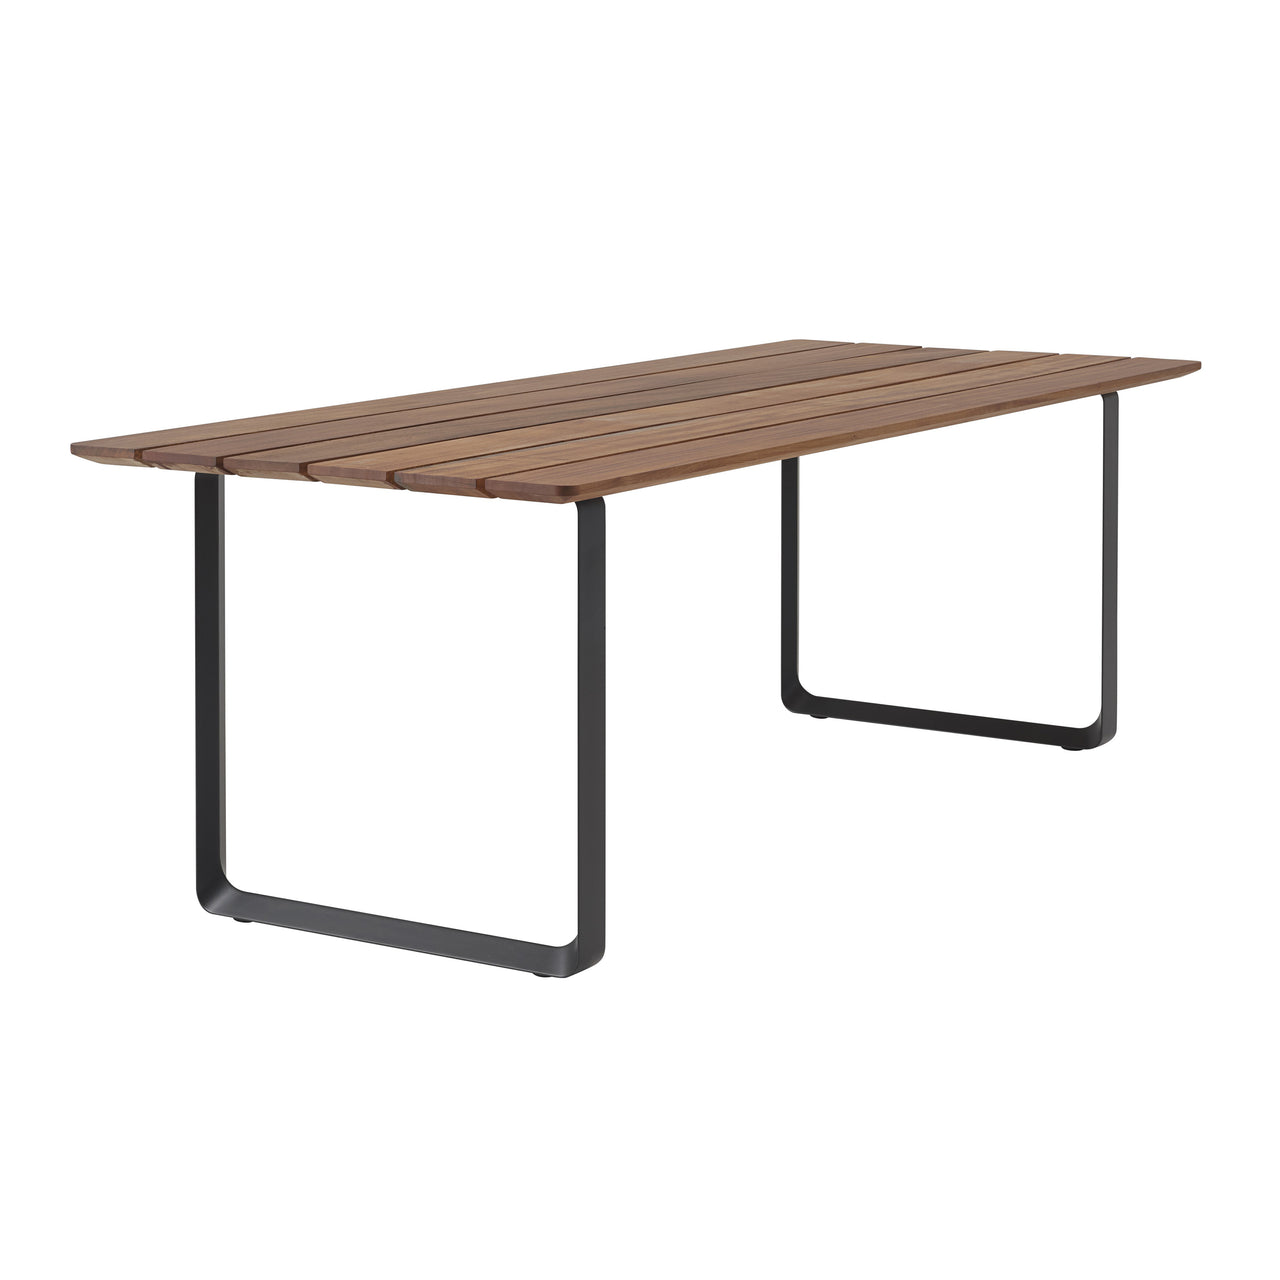 70/70 Table: Outdoor + Anthracite Black